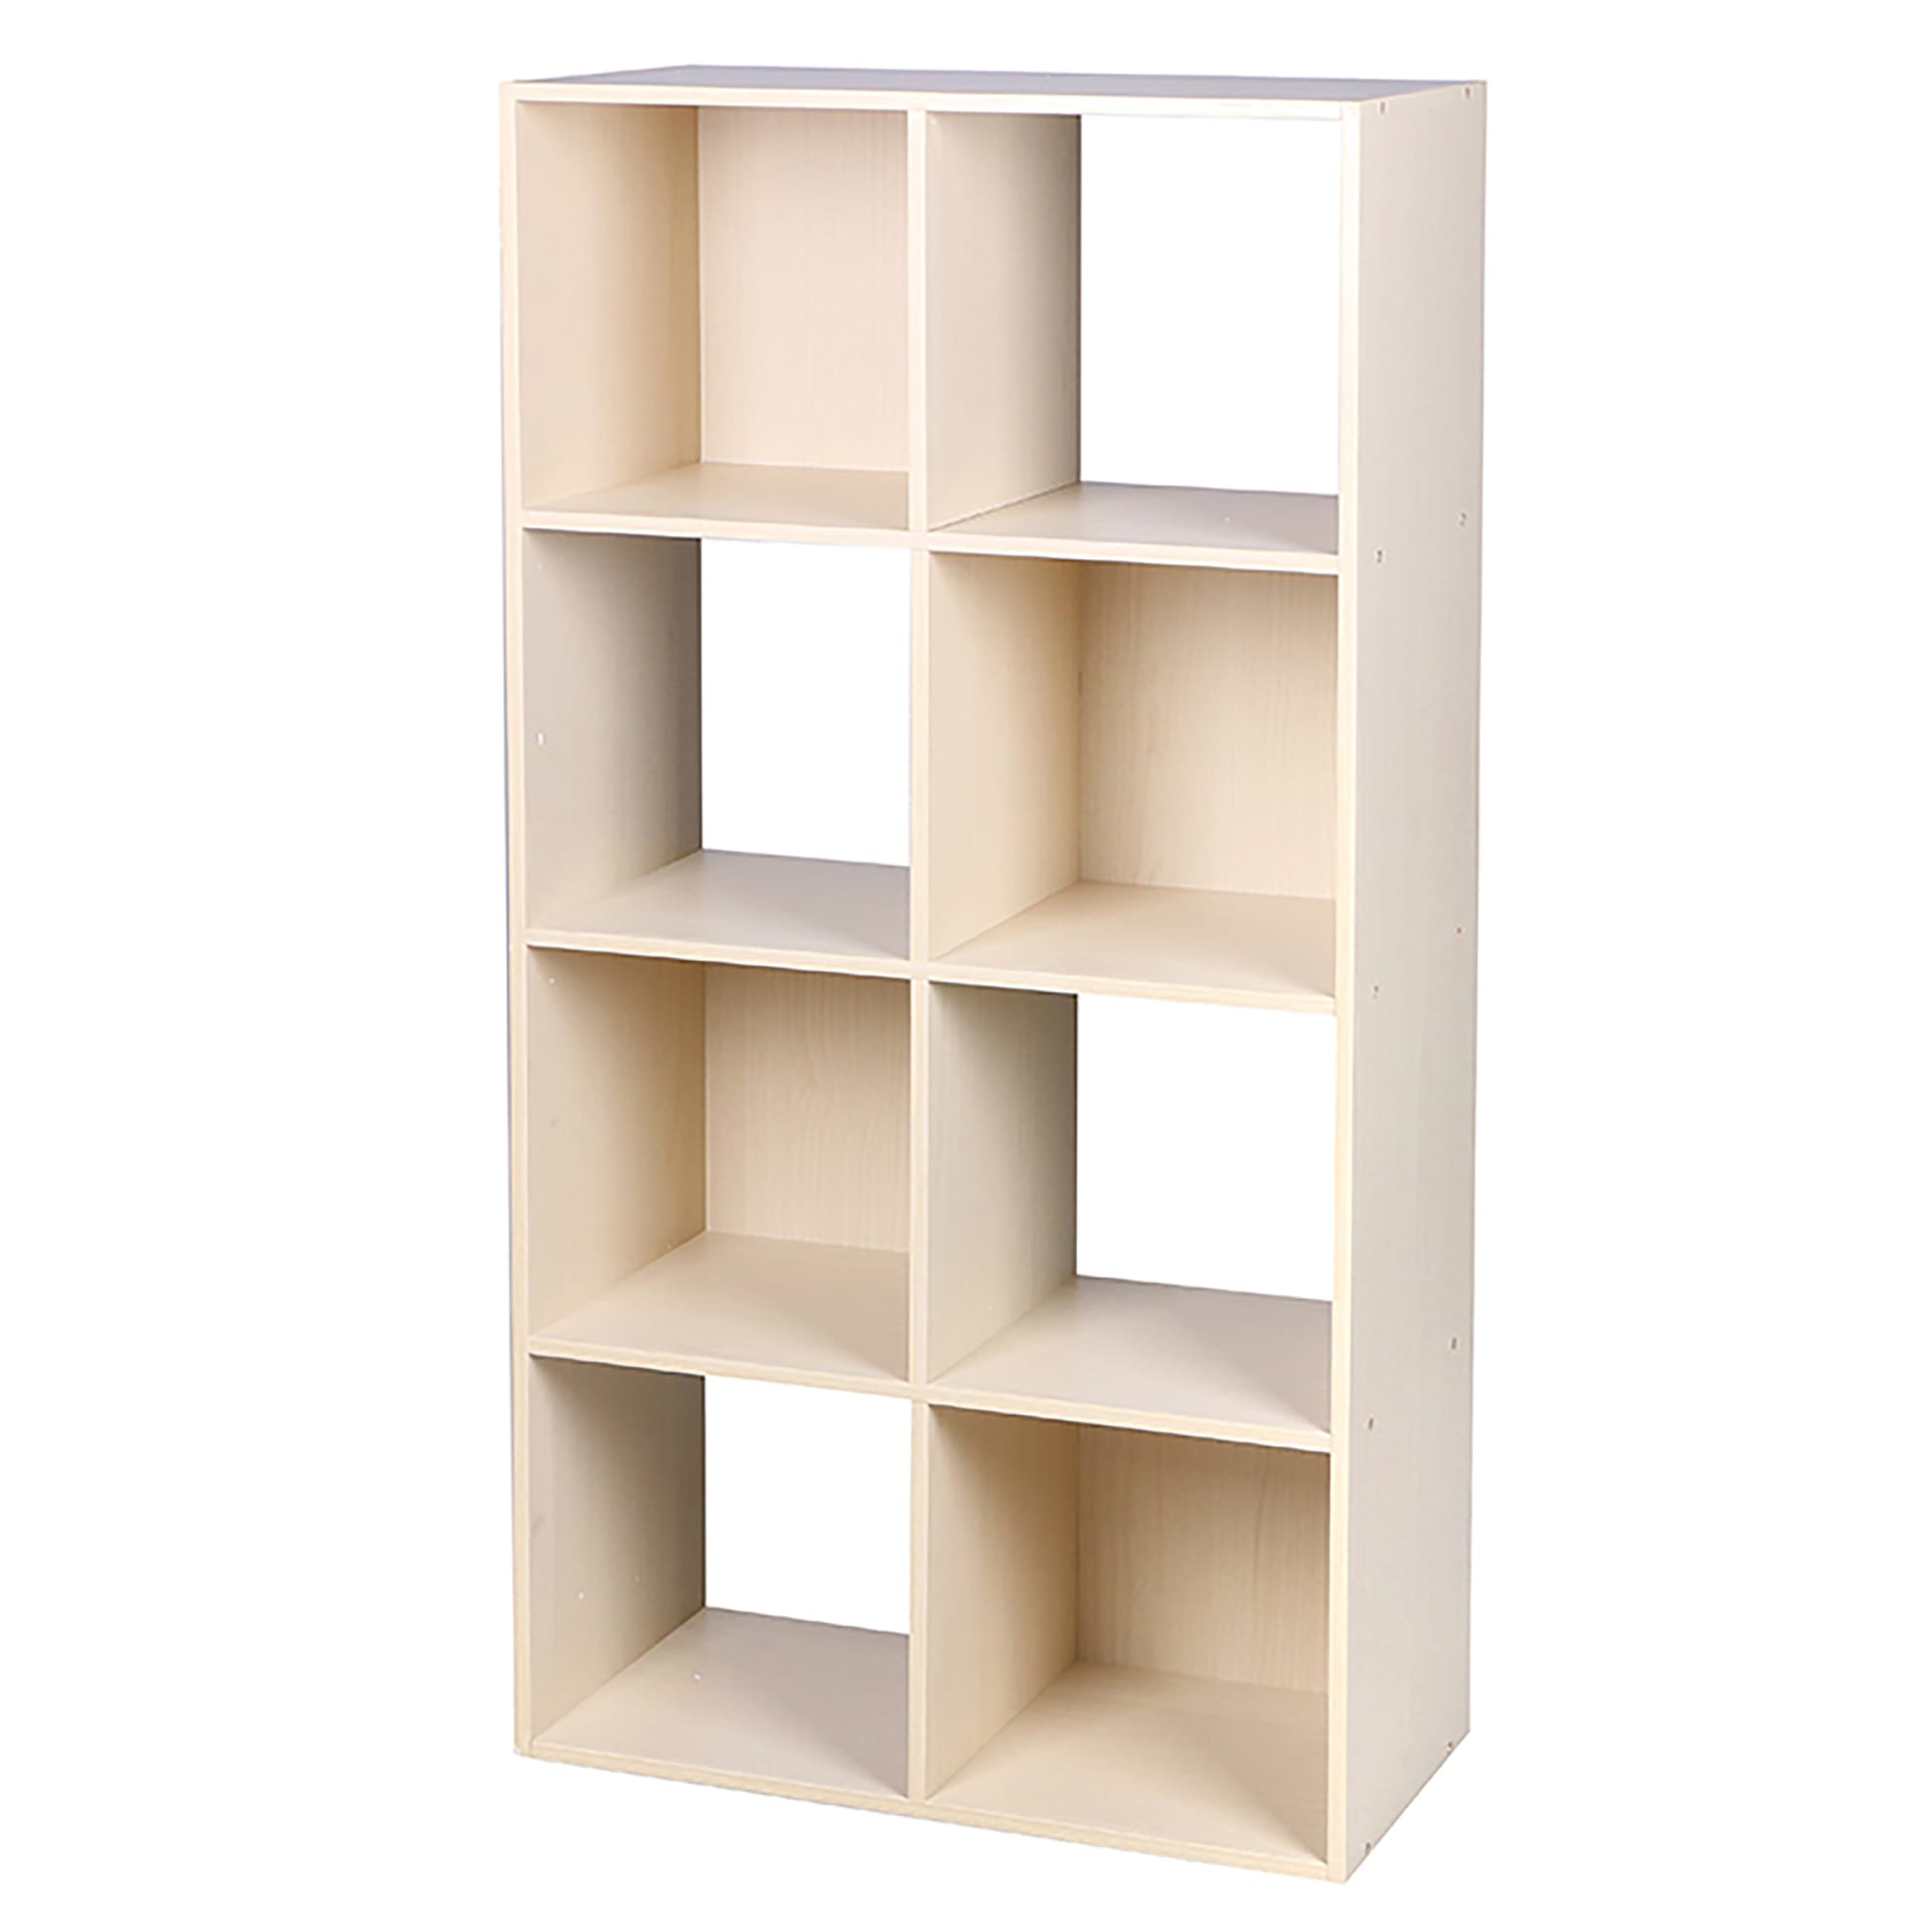 Home Basics Open and Enclosed 8 Cube MDF Storage Organizer, Oak $50.00 EACH, CASE PACK OF 1